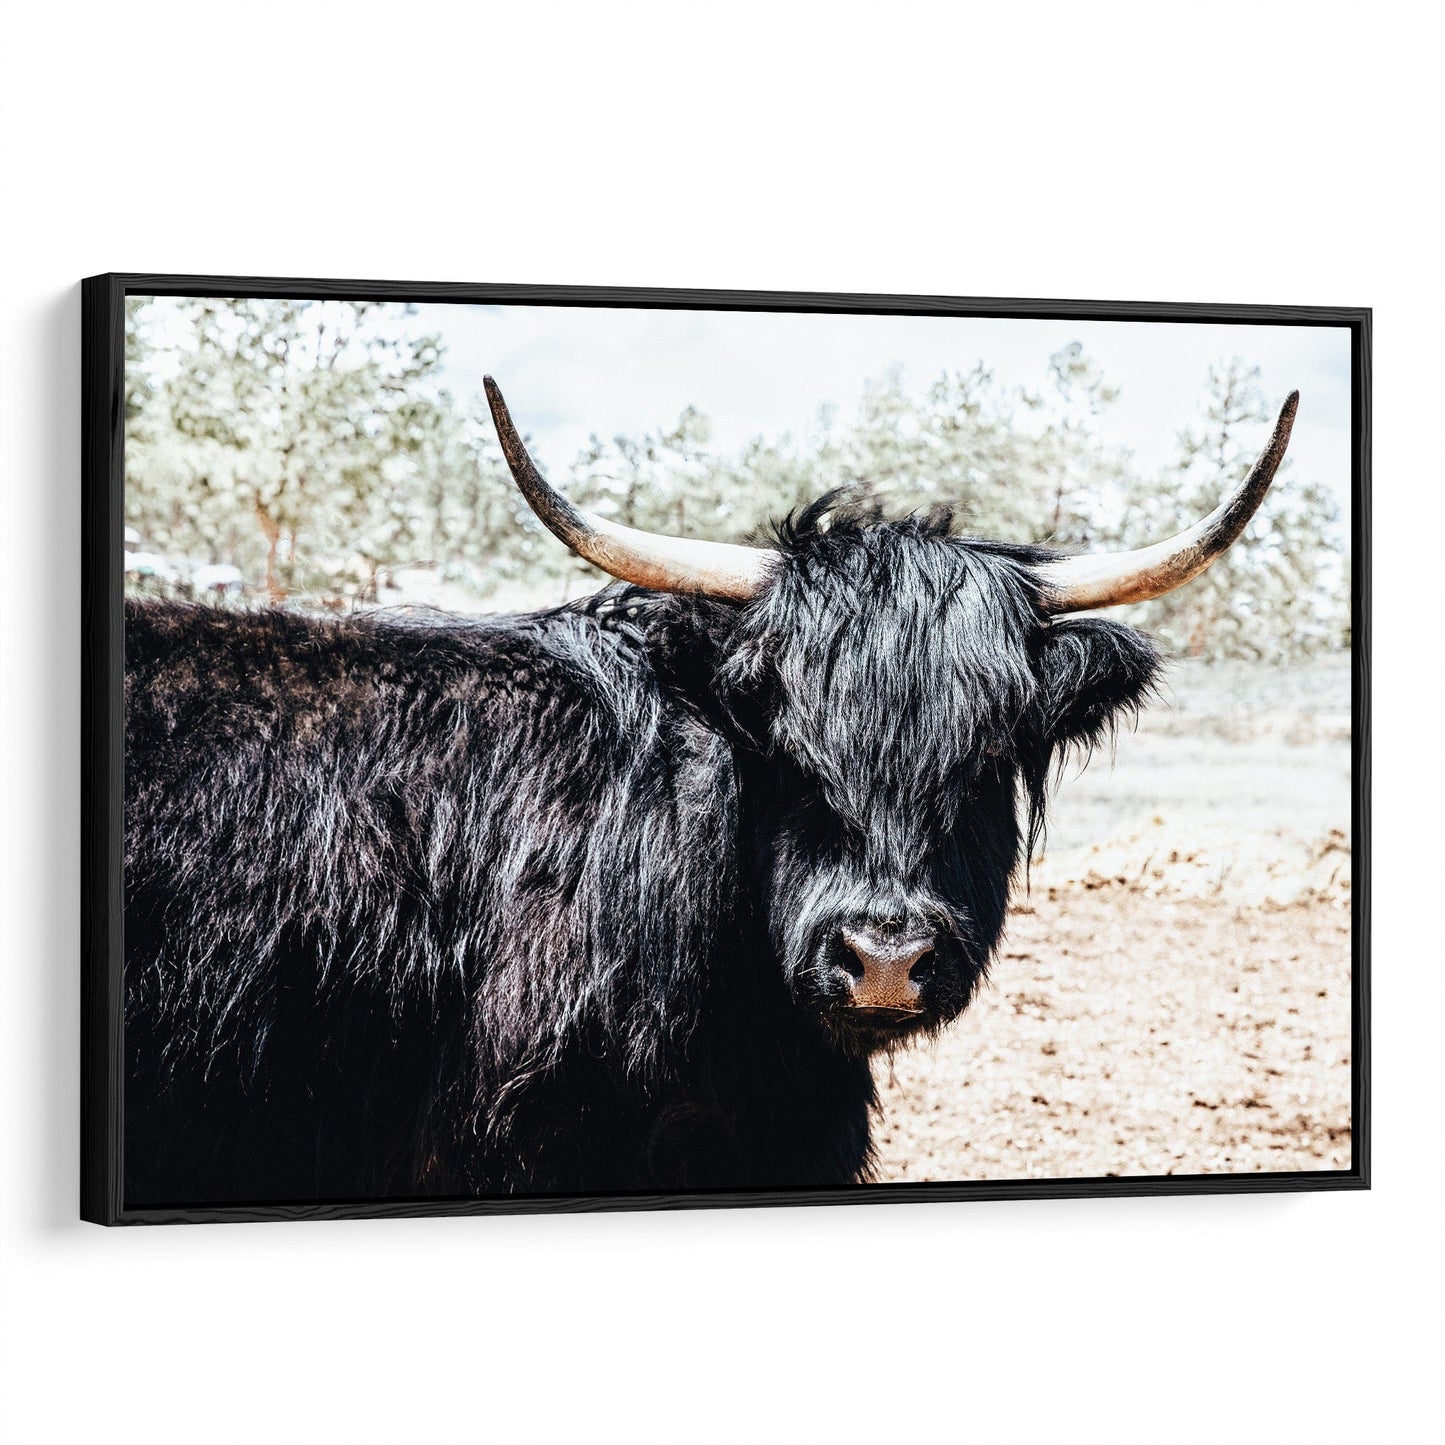 Highland Cattle Picture Canvas-Black Frame / 12 x 18 Inches Wall Art Teri James Photography